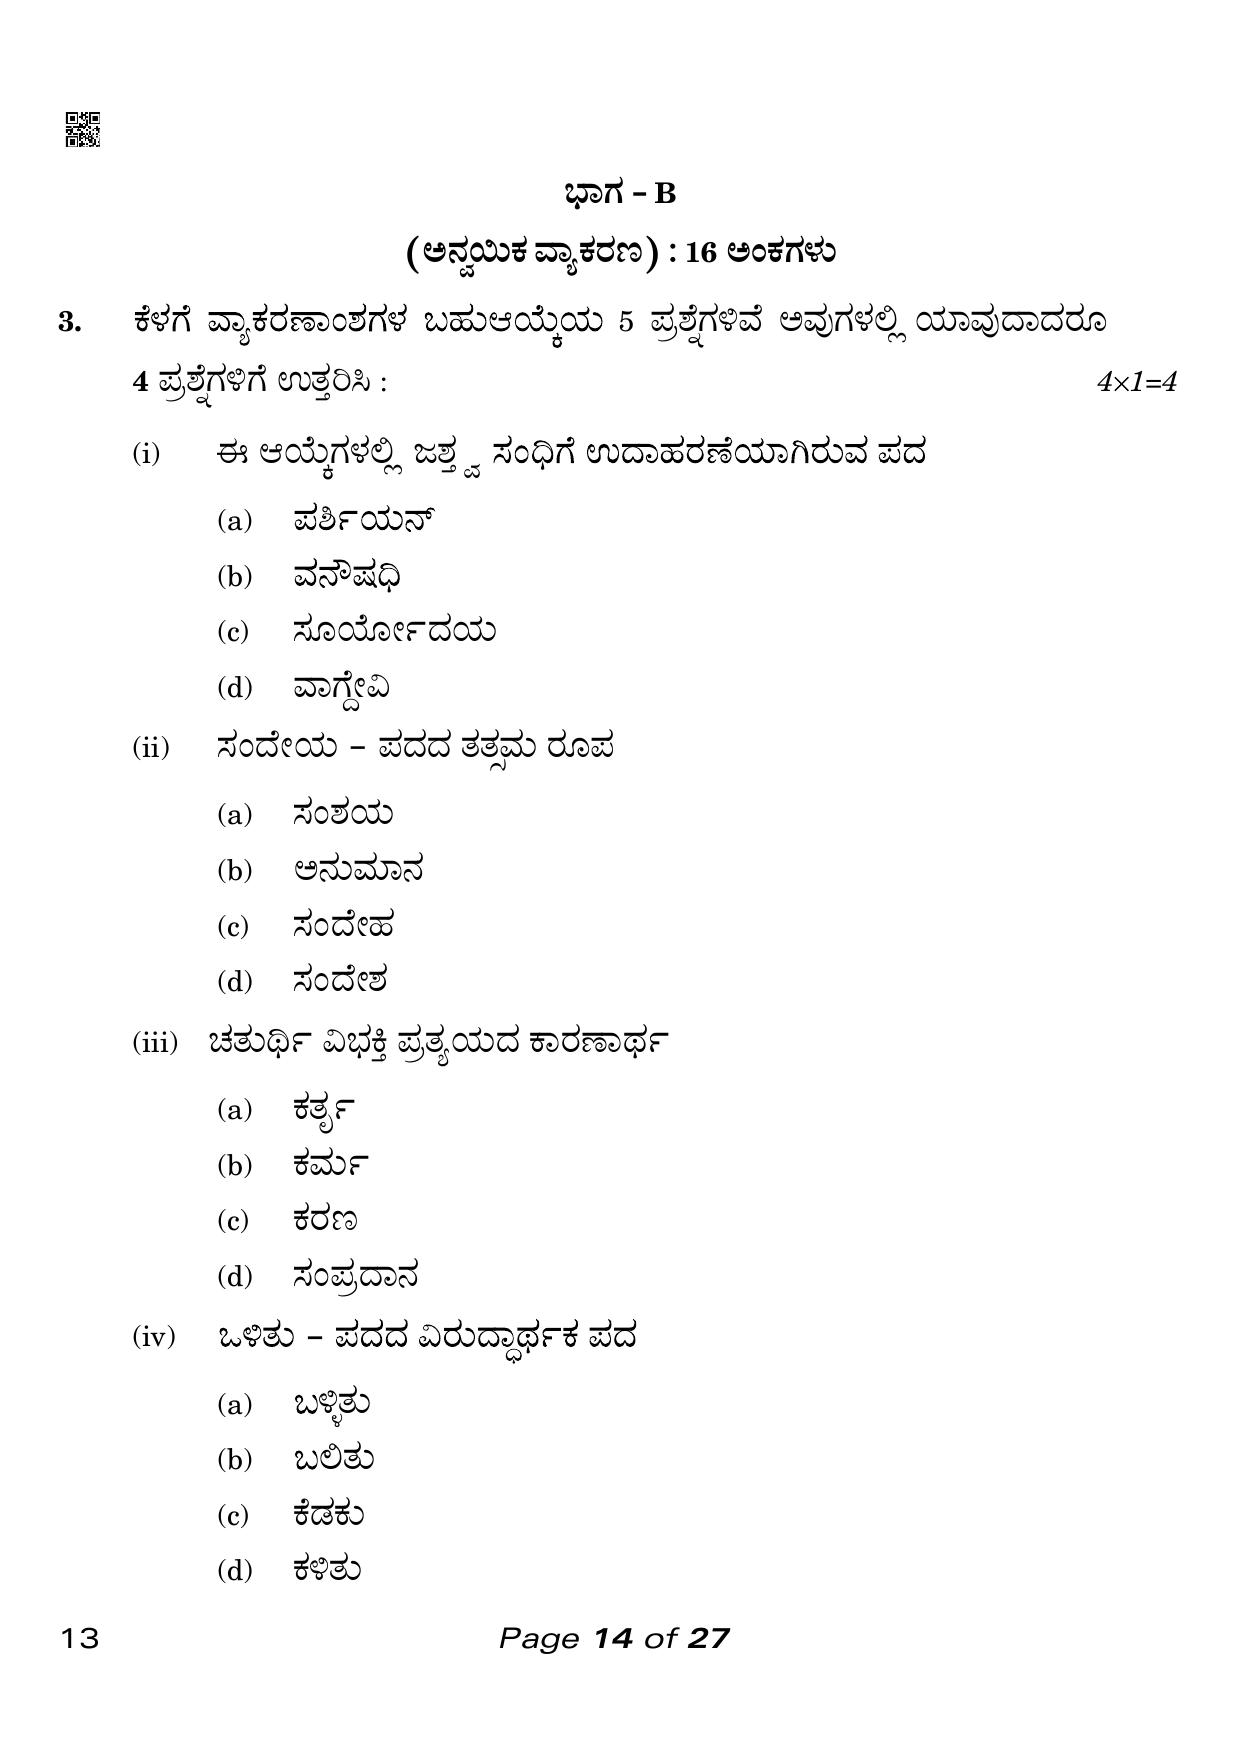 CBSE Class 10 Kannada (Compartment) 2023 Question Paper - Page 14